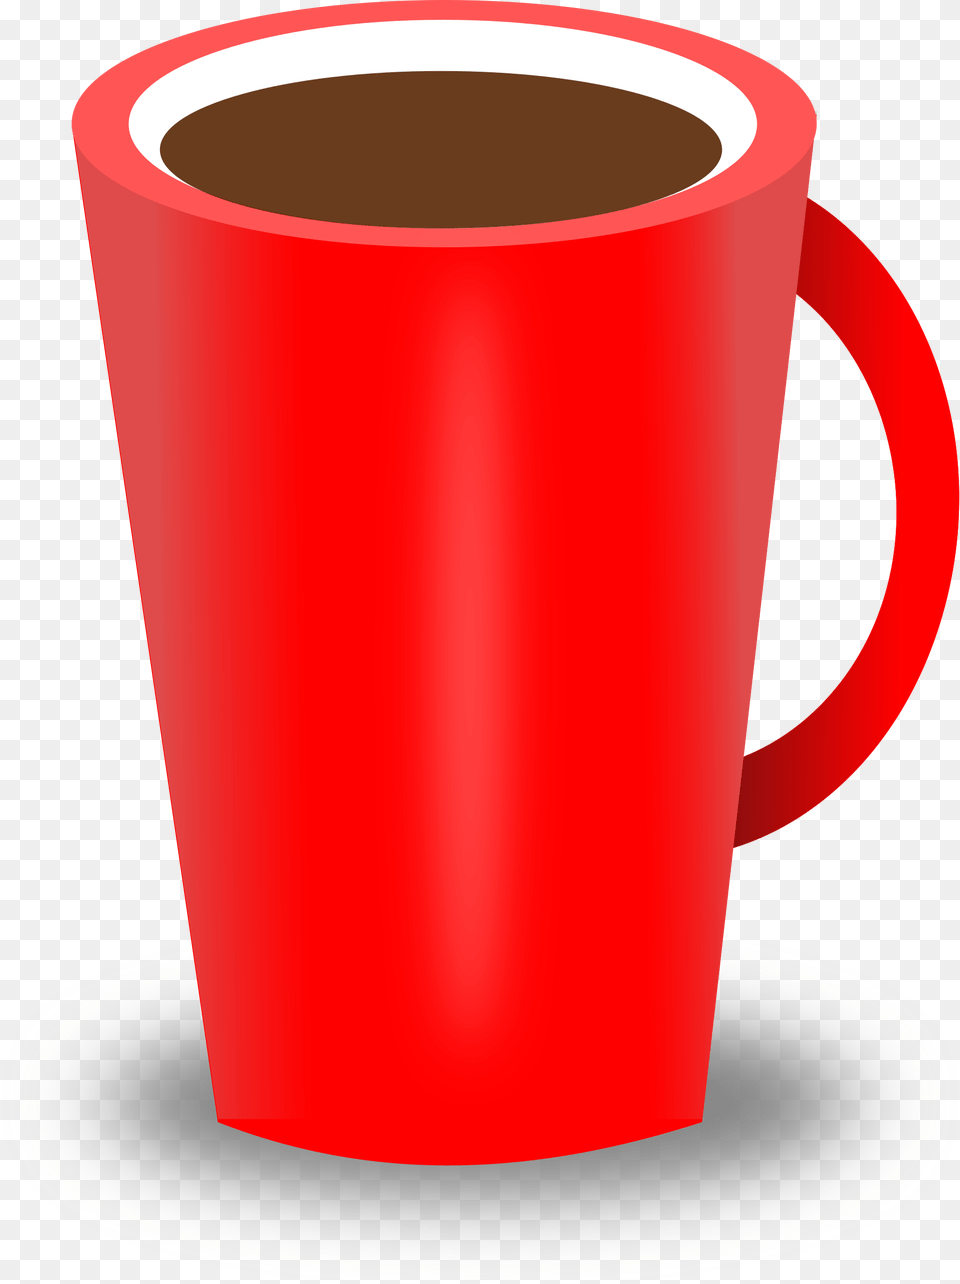 Cupredtablewareclip Artcylindermaterial Red Coffee Cup Clipart, Beverage, Coffee Cup, Can, Tin Free Transparent Png